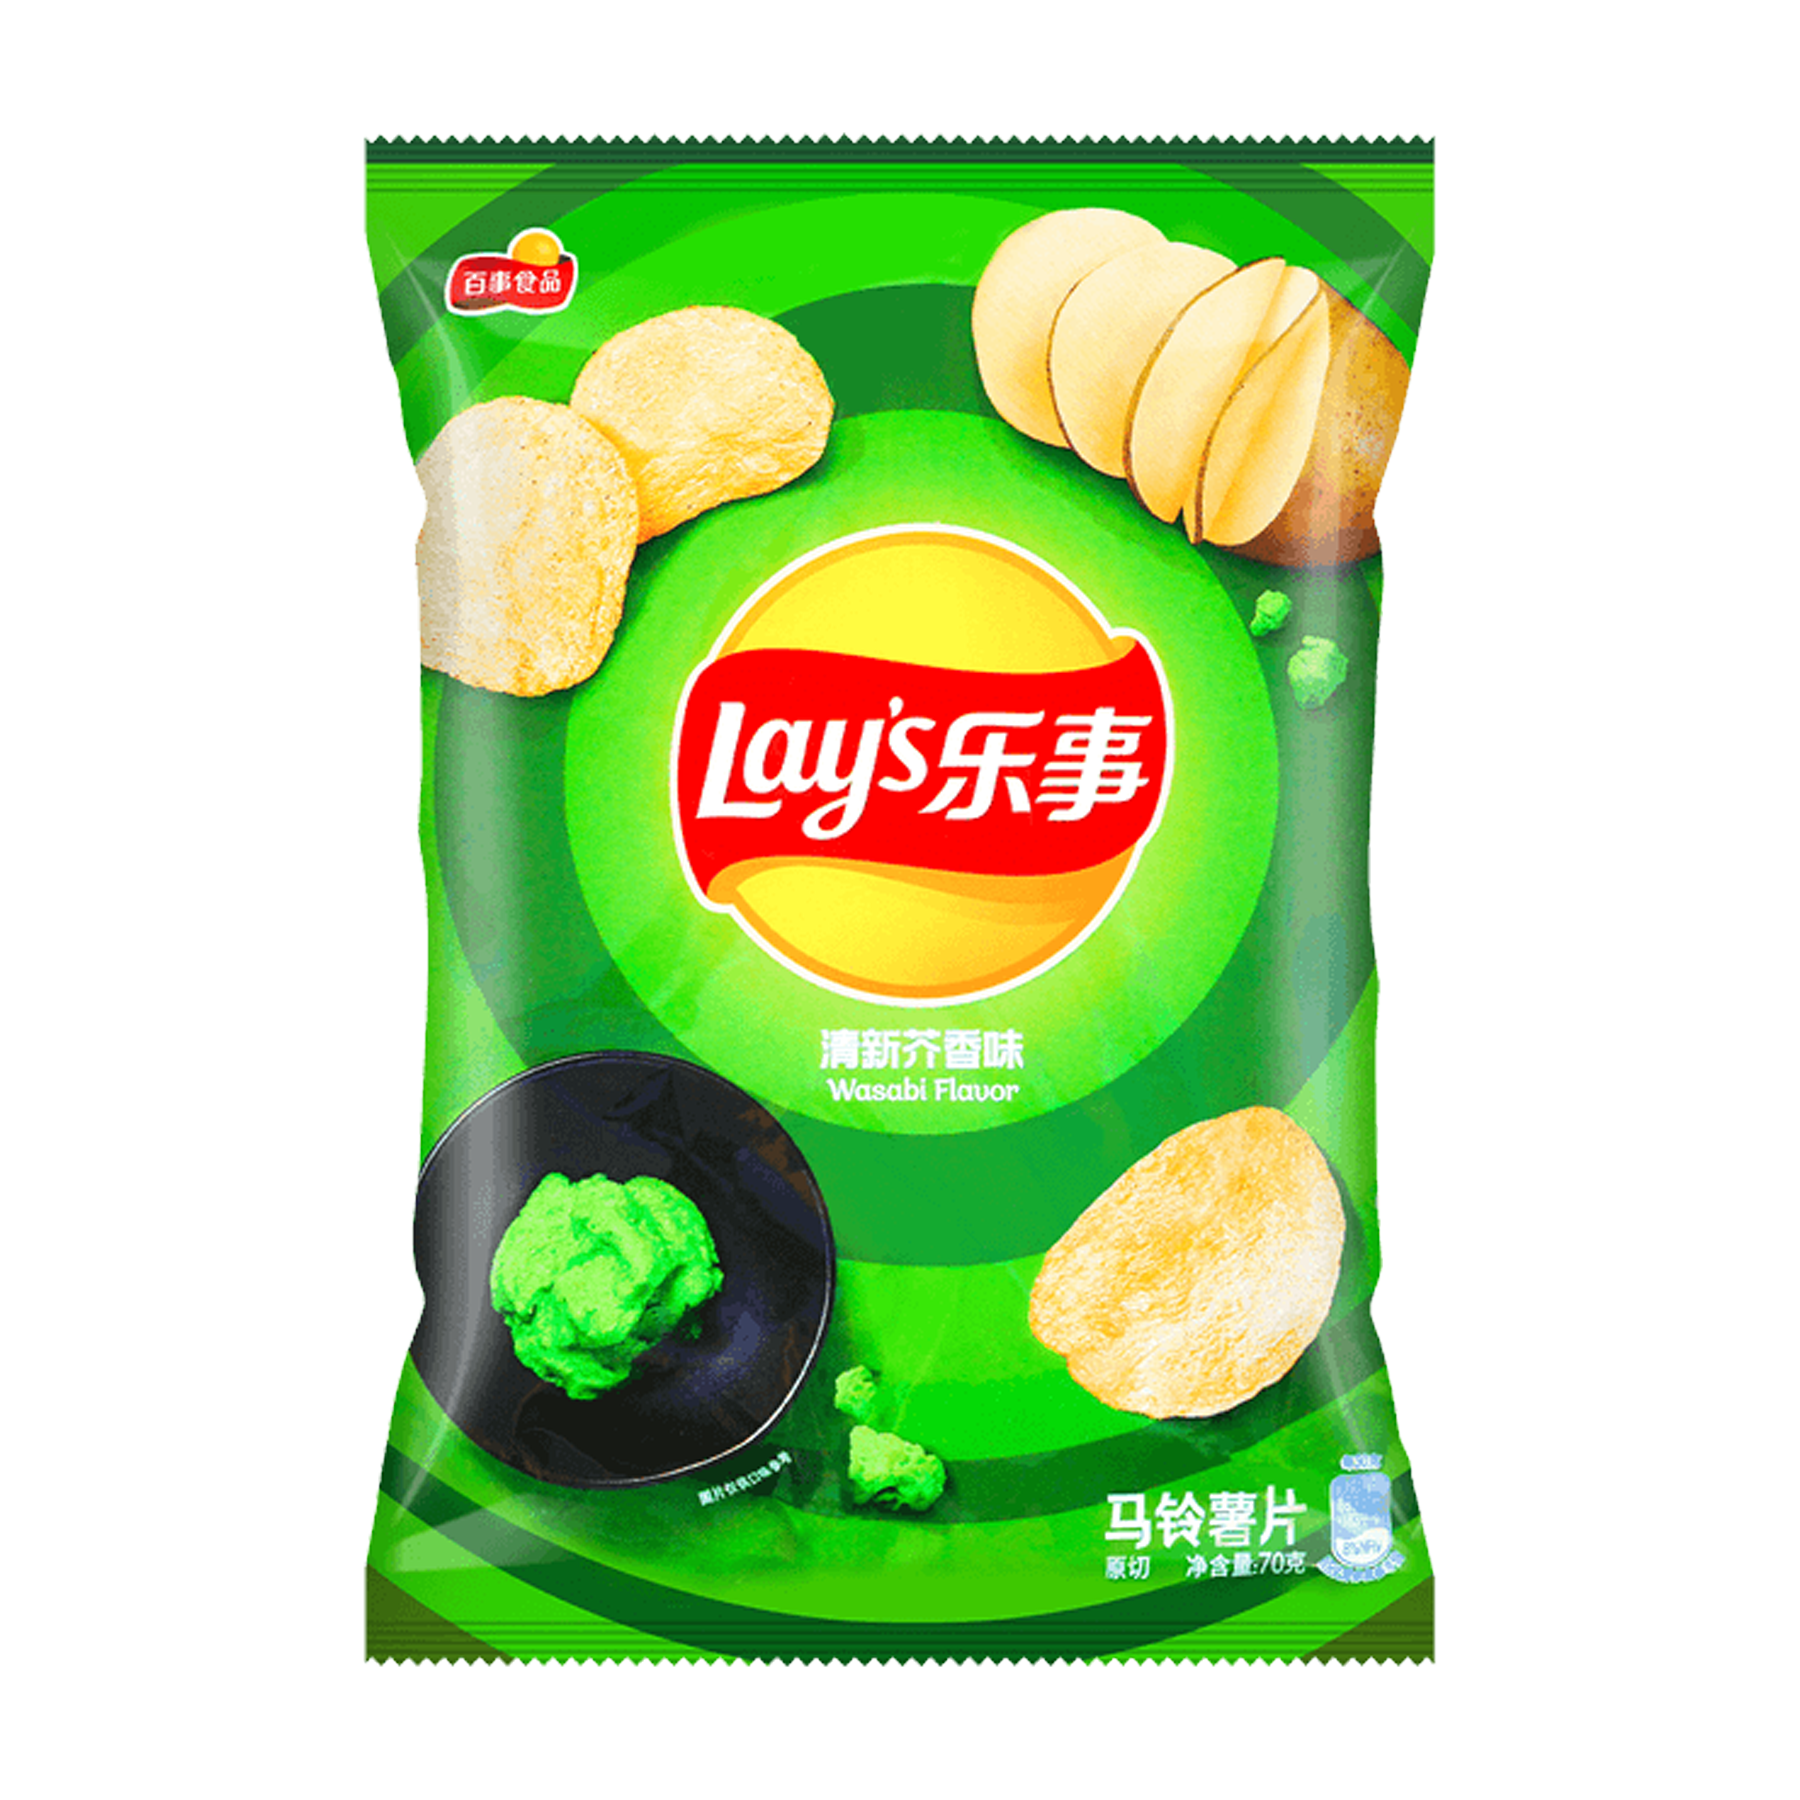 Lays Wasabi Flavored Chips